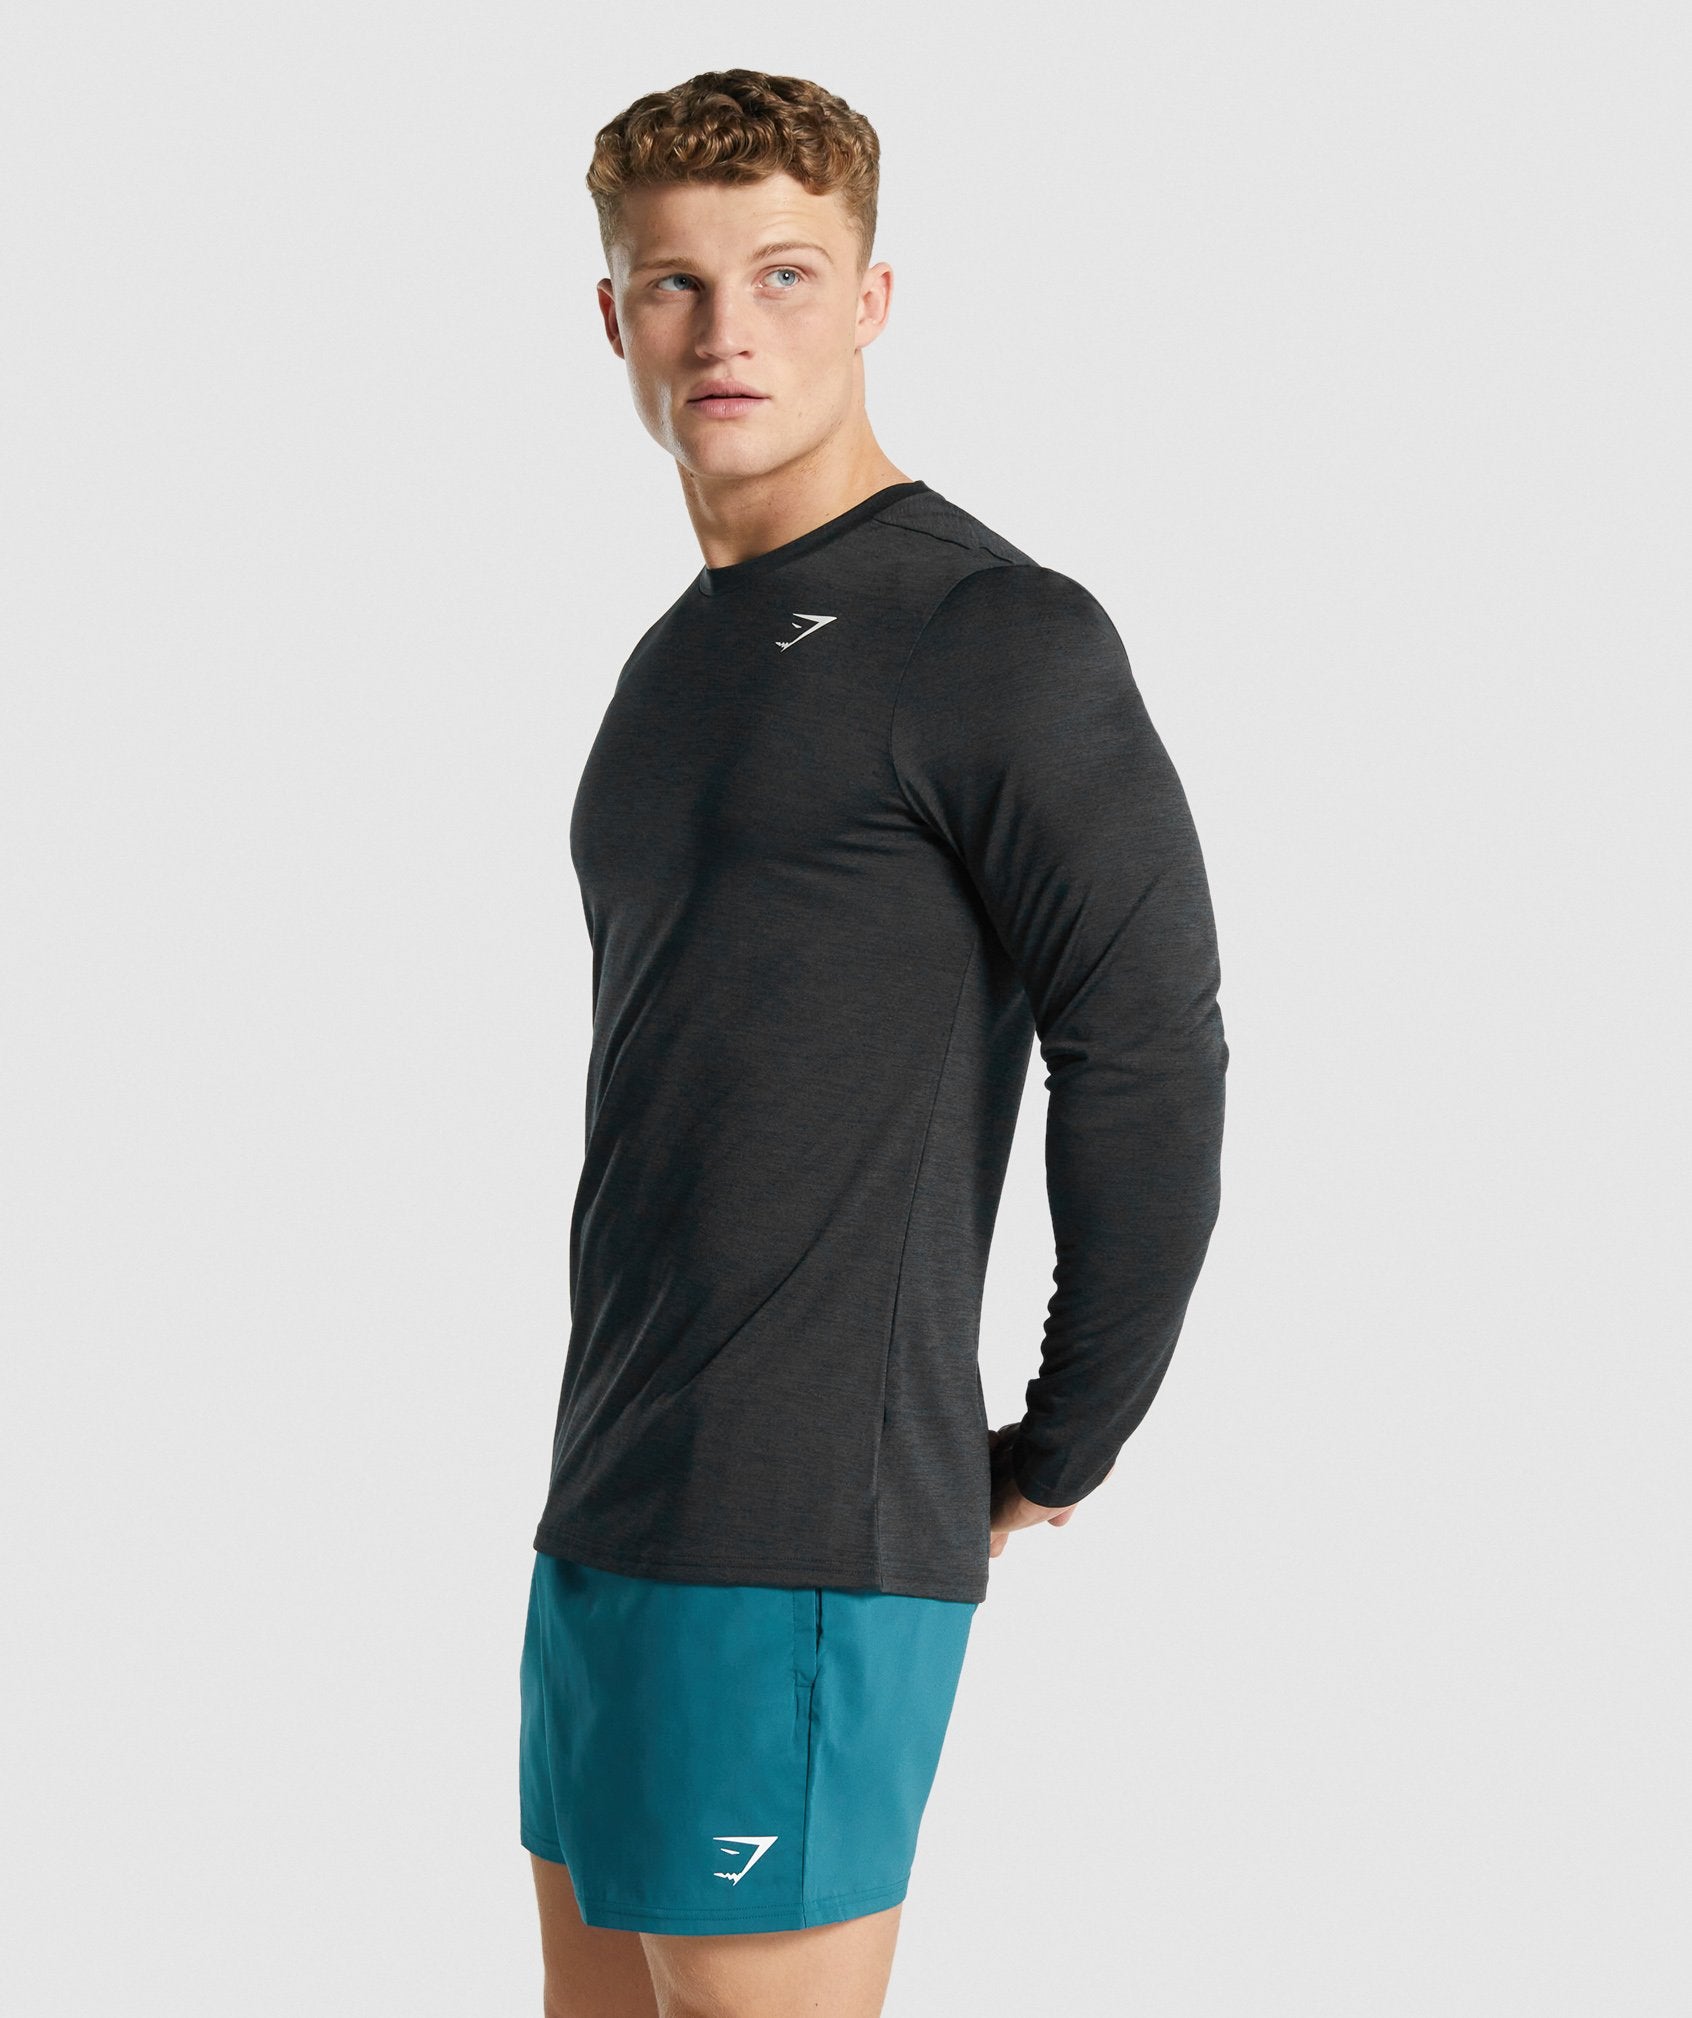 Arrival Marl Long Sleeve T-Shirt in Black Marl - view 3